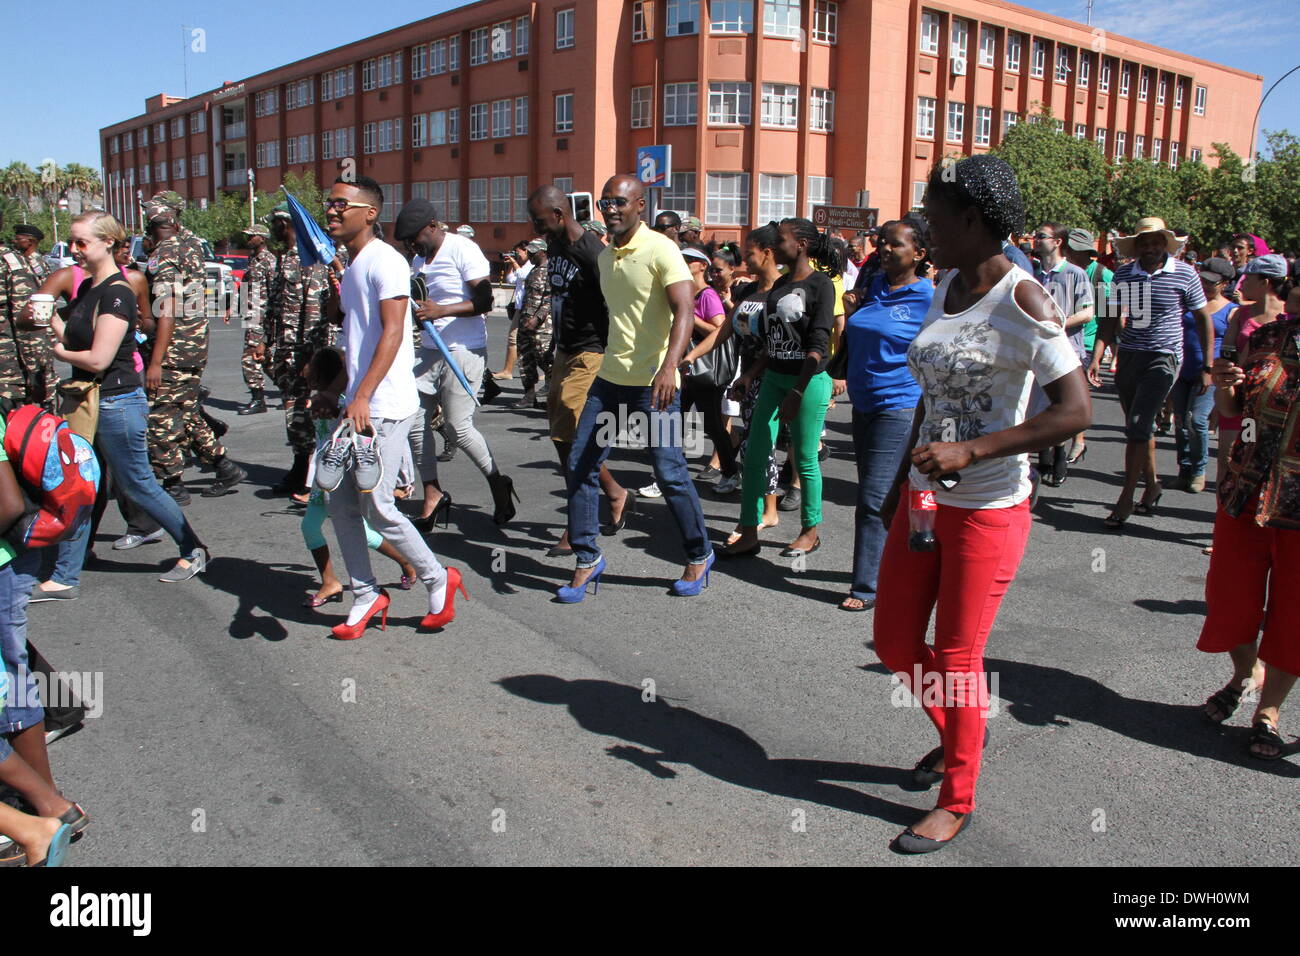 Windhoek, Namibia. 8th March 2014. Men wearing high-heels participate in a march to protest gender based violence in Windhoek. Dozens of men wearing high-heels participated in the 'Men March to Stop Gender Based Violence & Passion Killing in Namibia' in Namibian capital Windhoek on Saturday. The march aims to protest the surge of fatal crimes and violence against Namibian women since the beginning of this year, during which period over ten women were killed by their male partners in the southwestern African country with a population of two million. Credit:  Xinhua/Alamy Live News Stock Photo